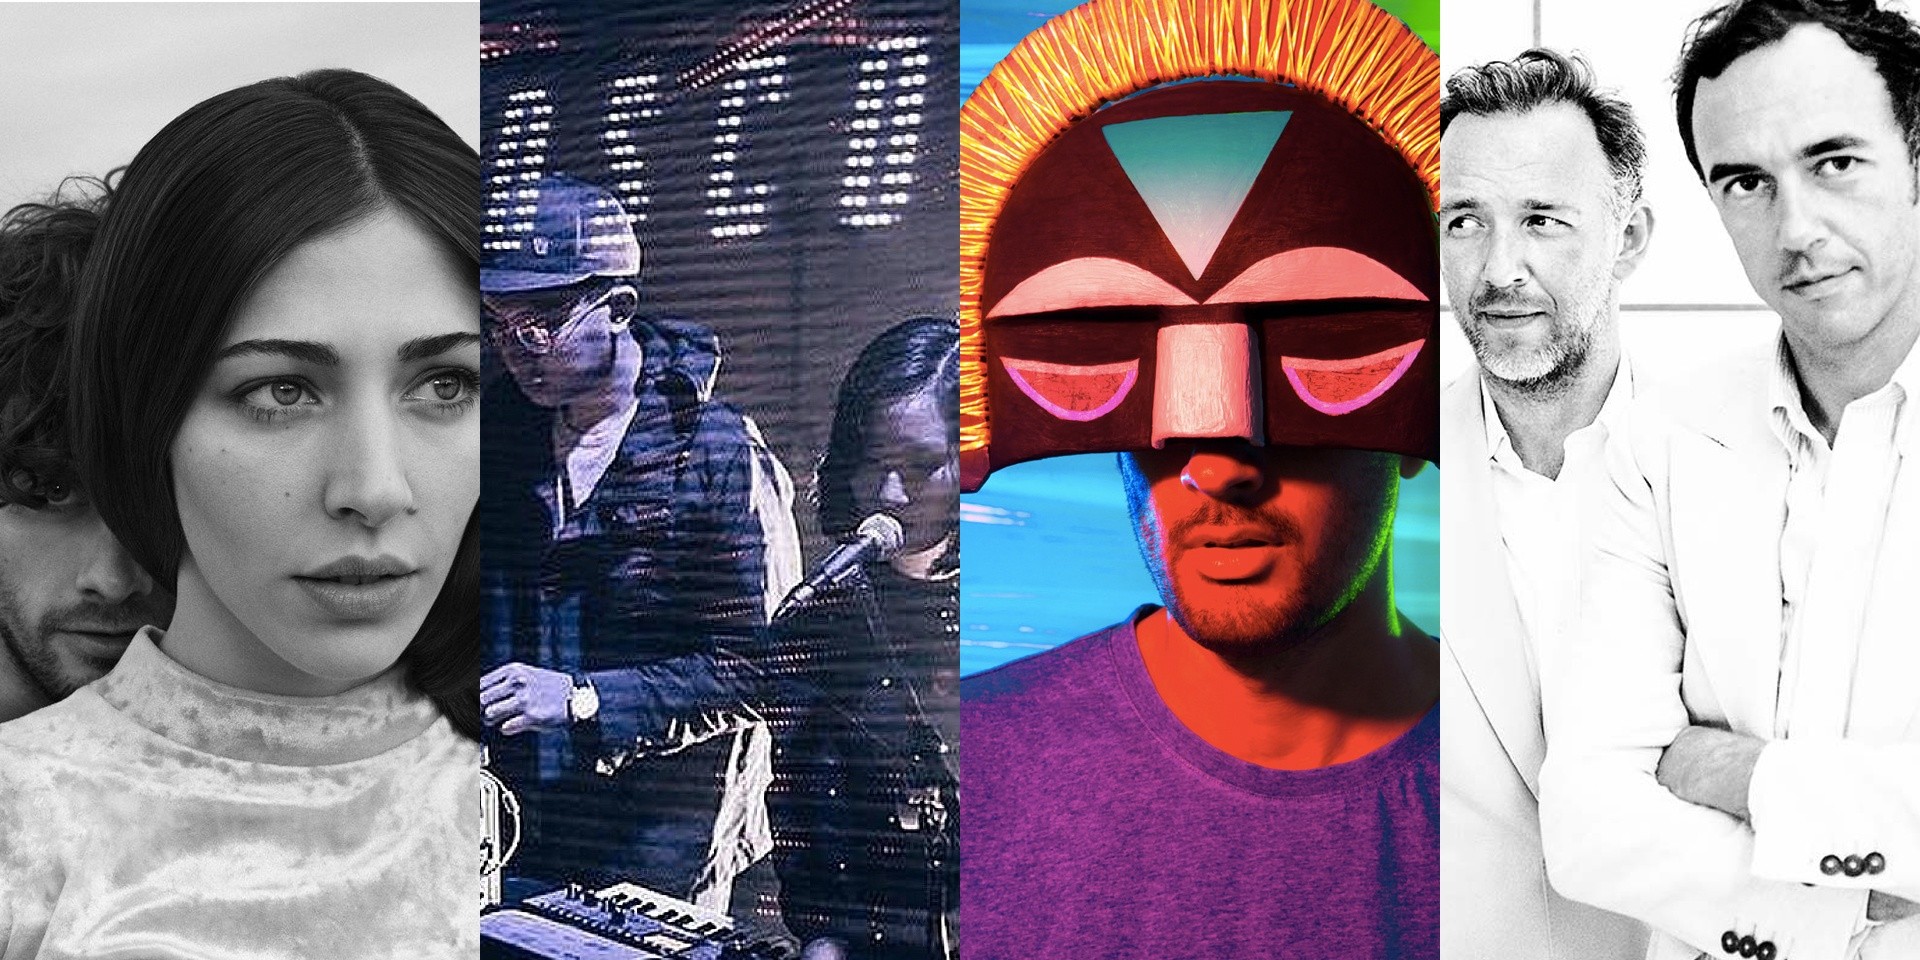 SBTRKT, 2manydjs, .gif and Chairlift among Neon Lights Festival's finalised line-up